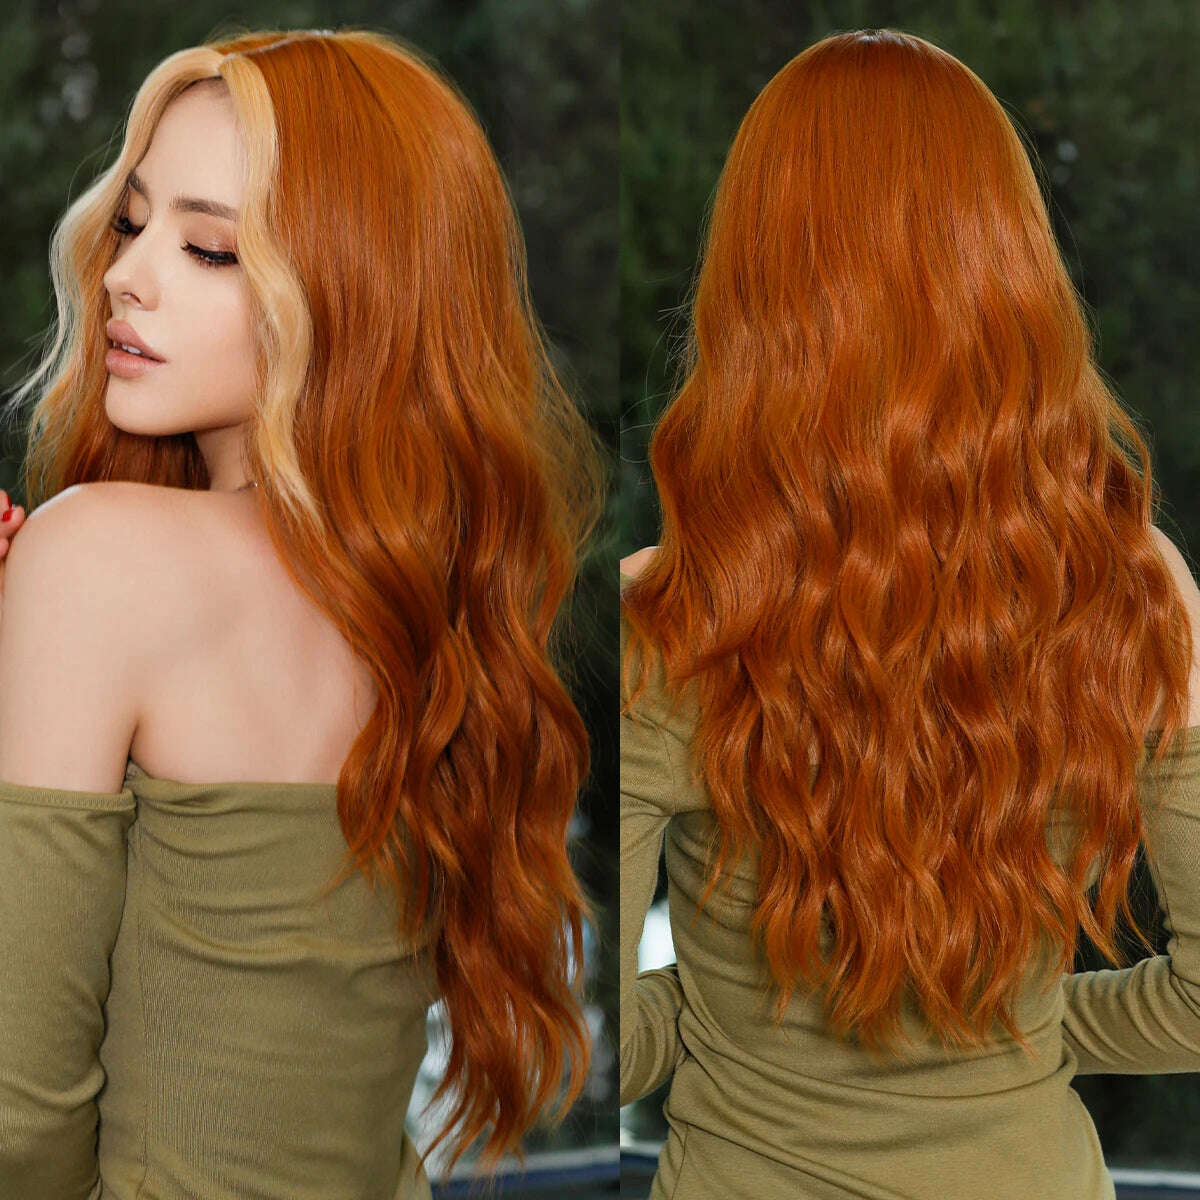 KIMLUD, NAMM Long Wavy Ombre Blonde Wigs for Women Cosplay Daily Party Synthetic Light Orange Hair Wig Lolita Heat Resistant Fiber, MW9068-1 / Follow us - 2USD, KIMLUD Womens Clothes